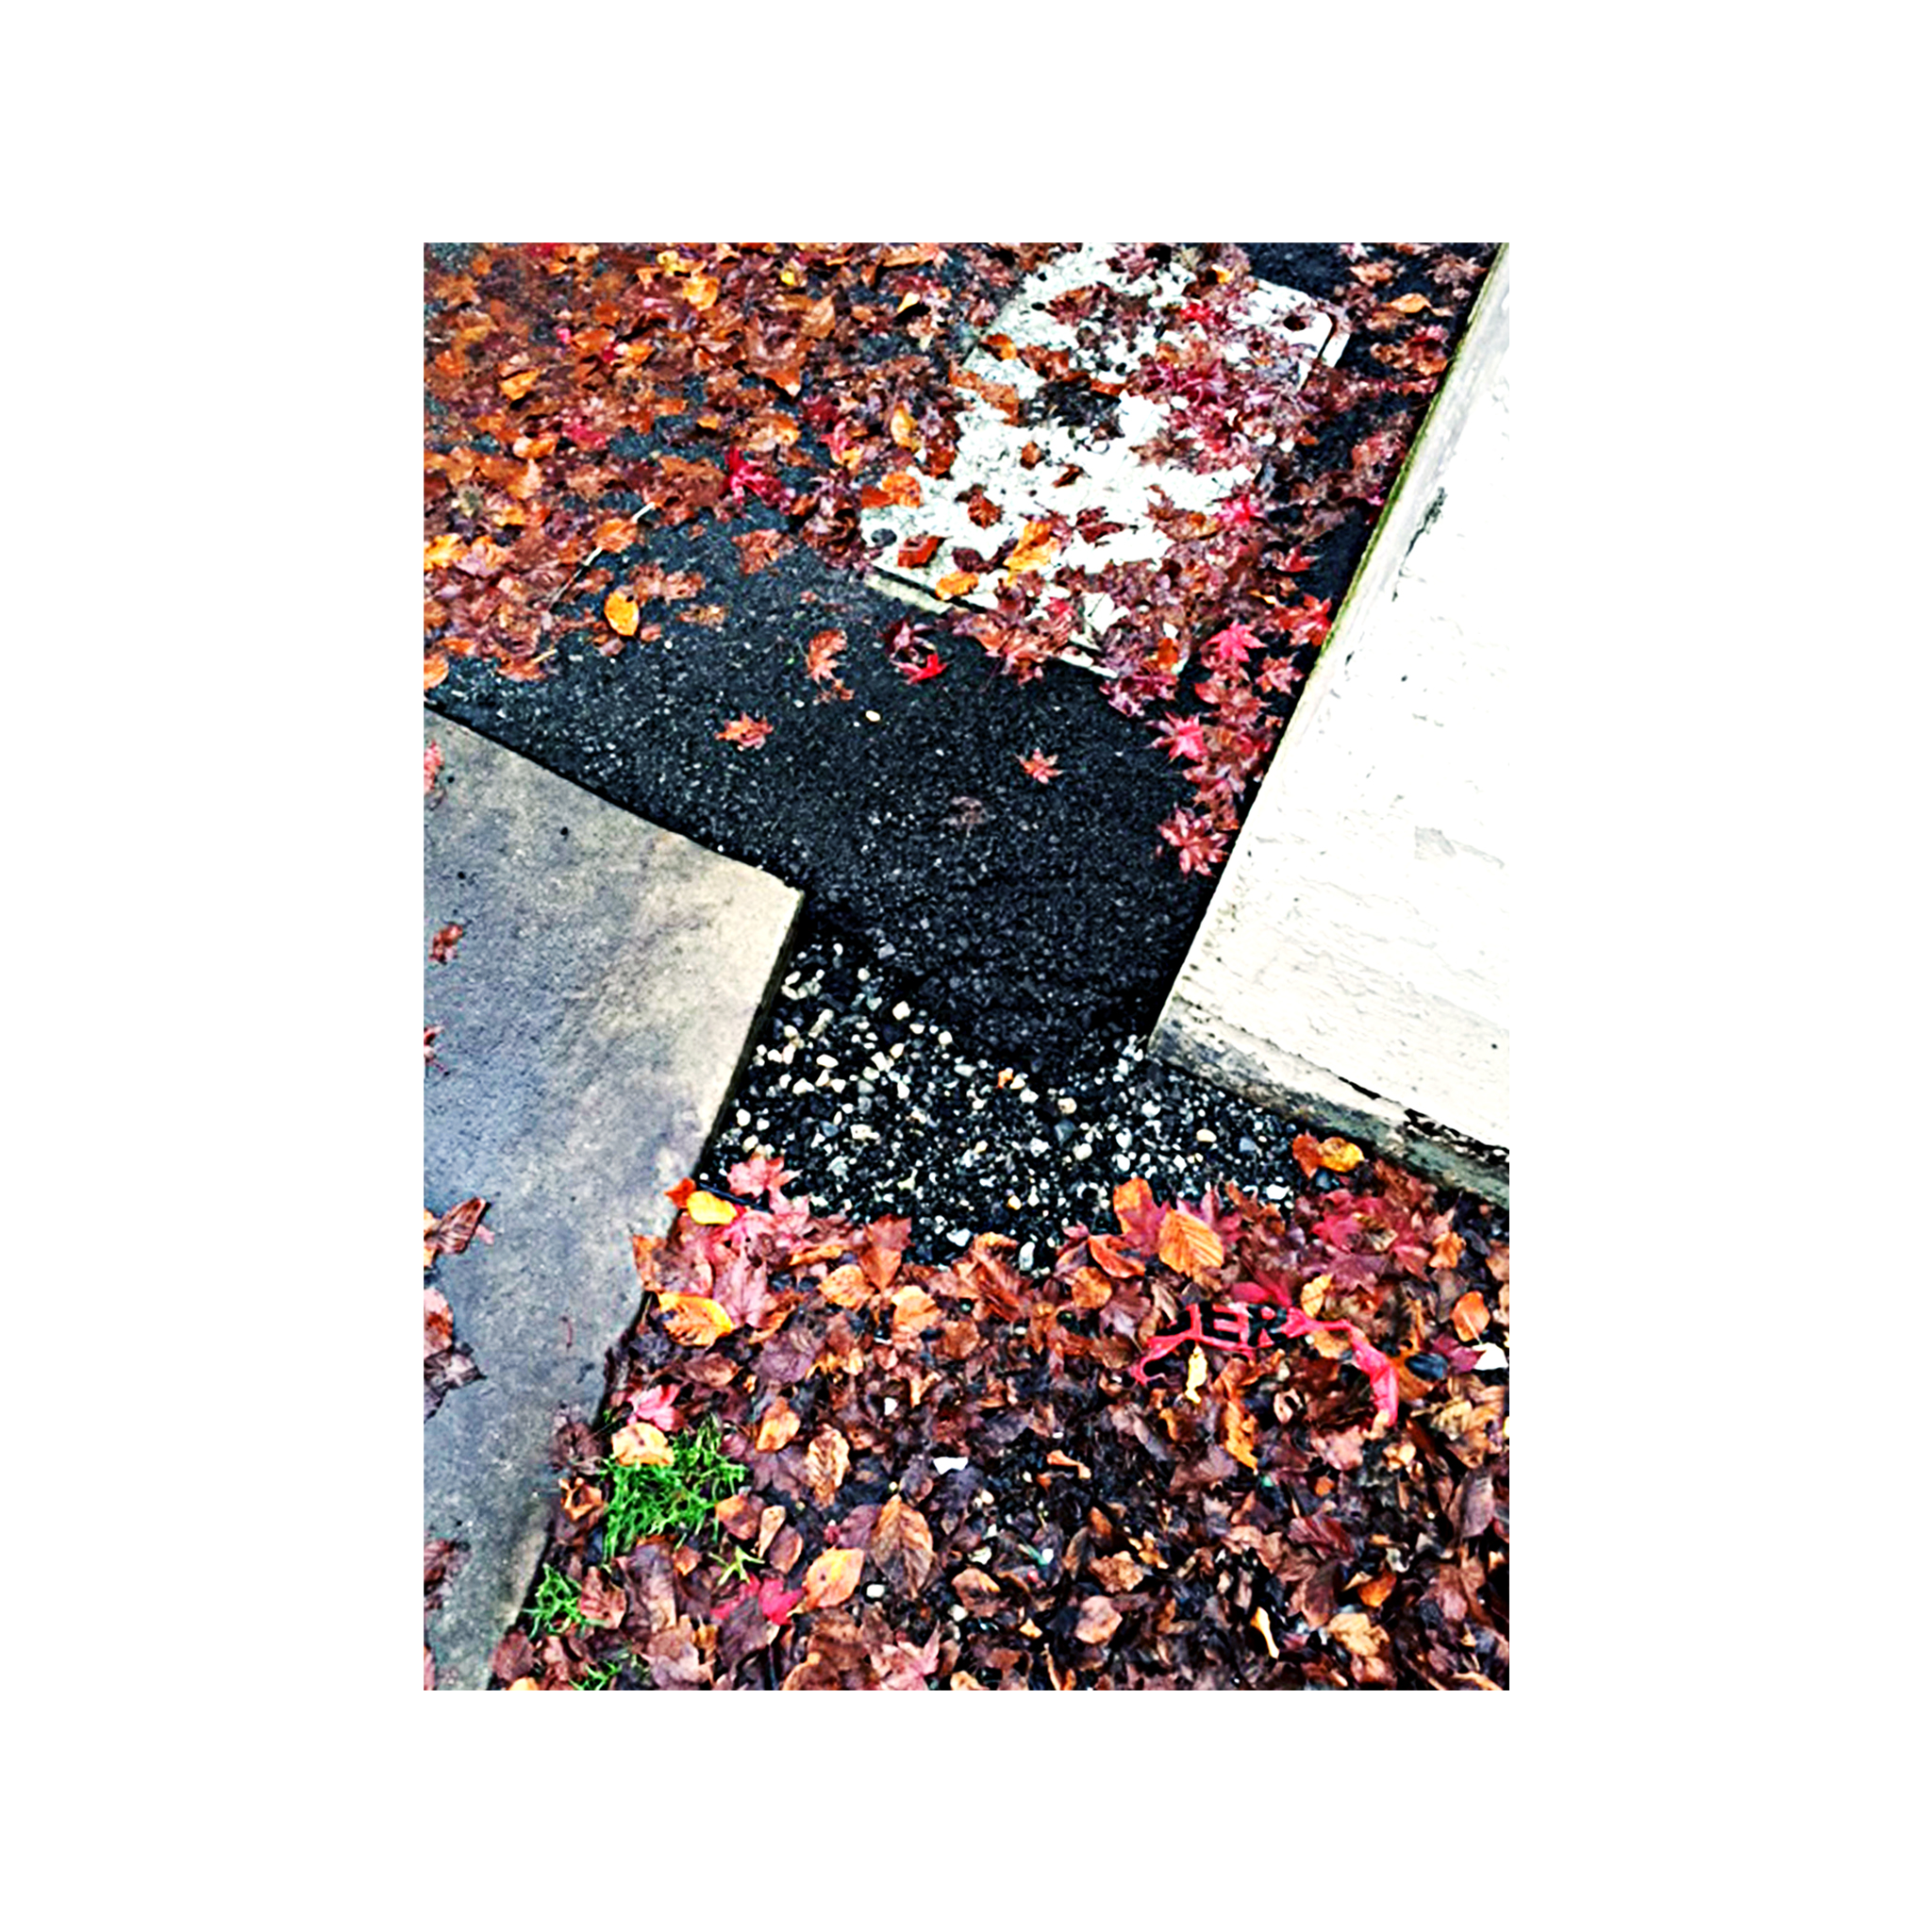 Cement sidewalk with autumn leaves